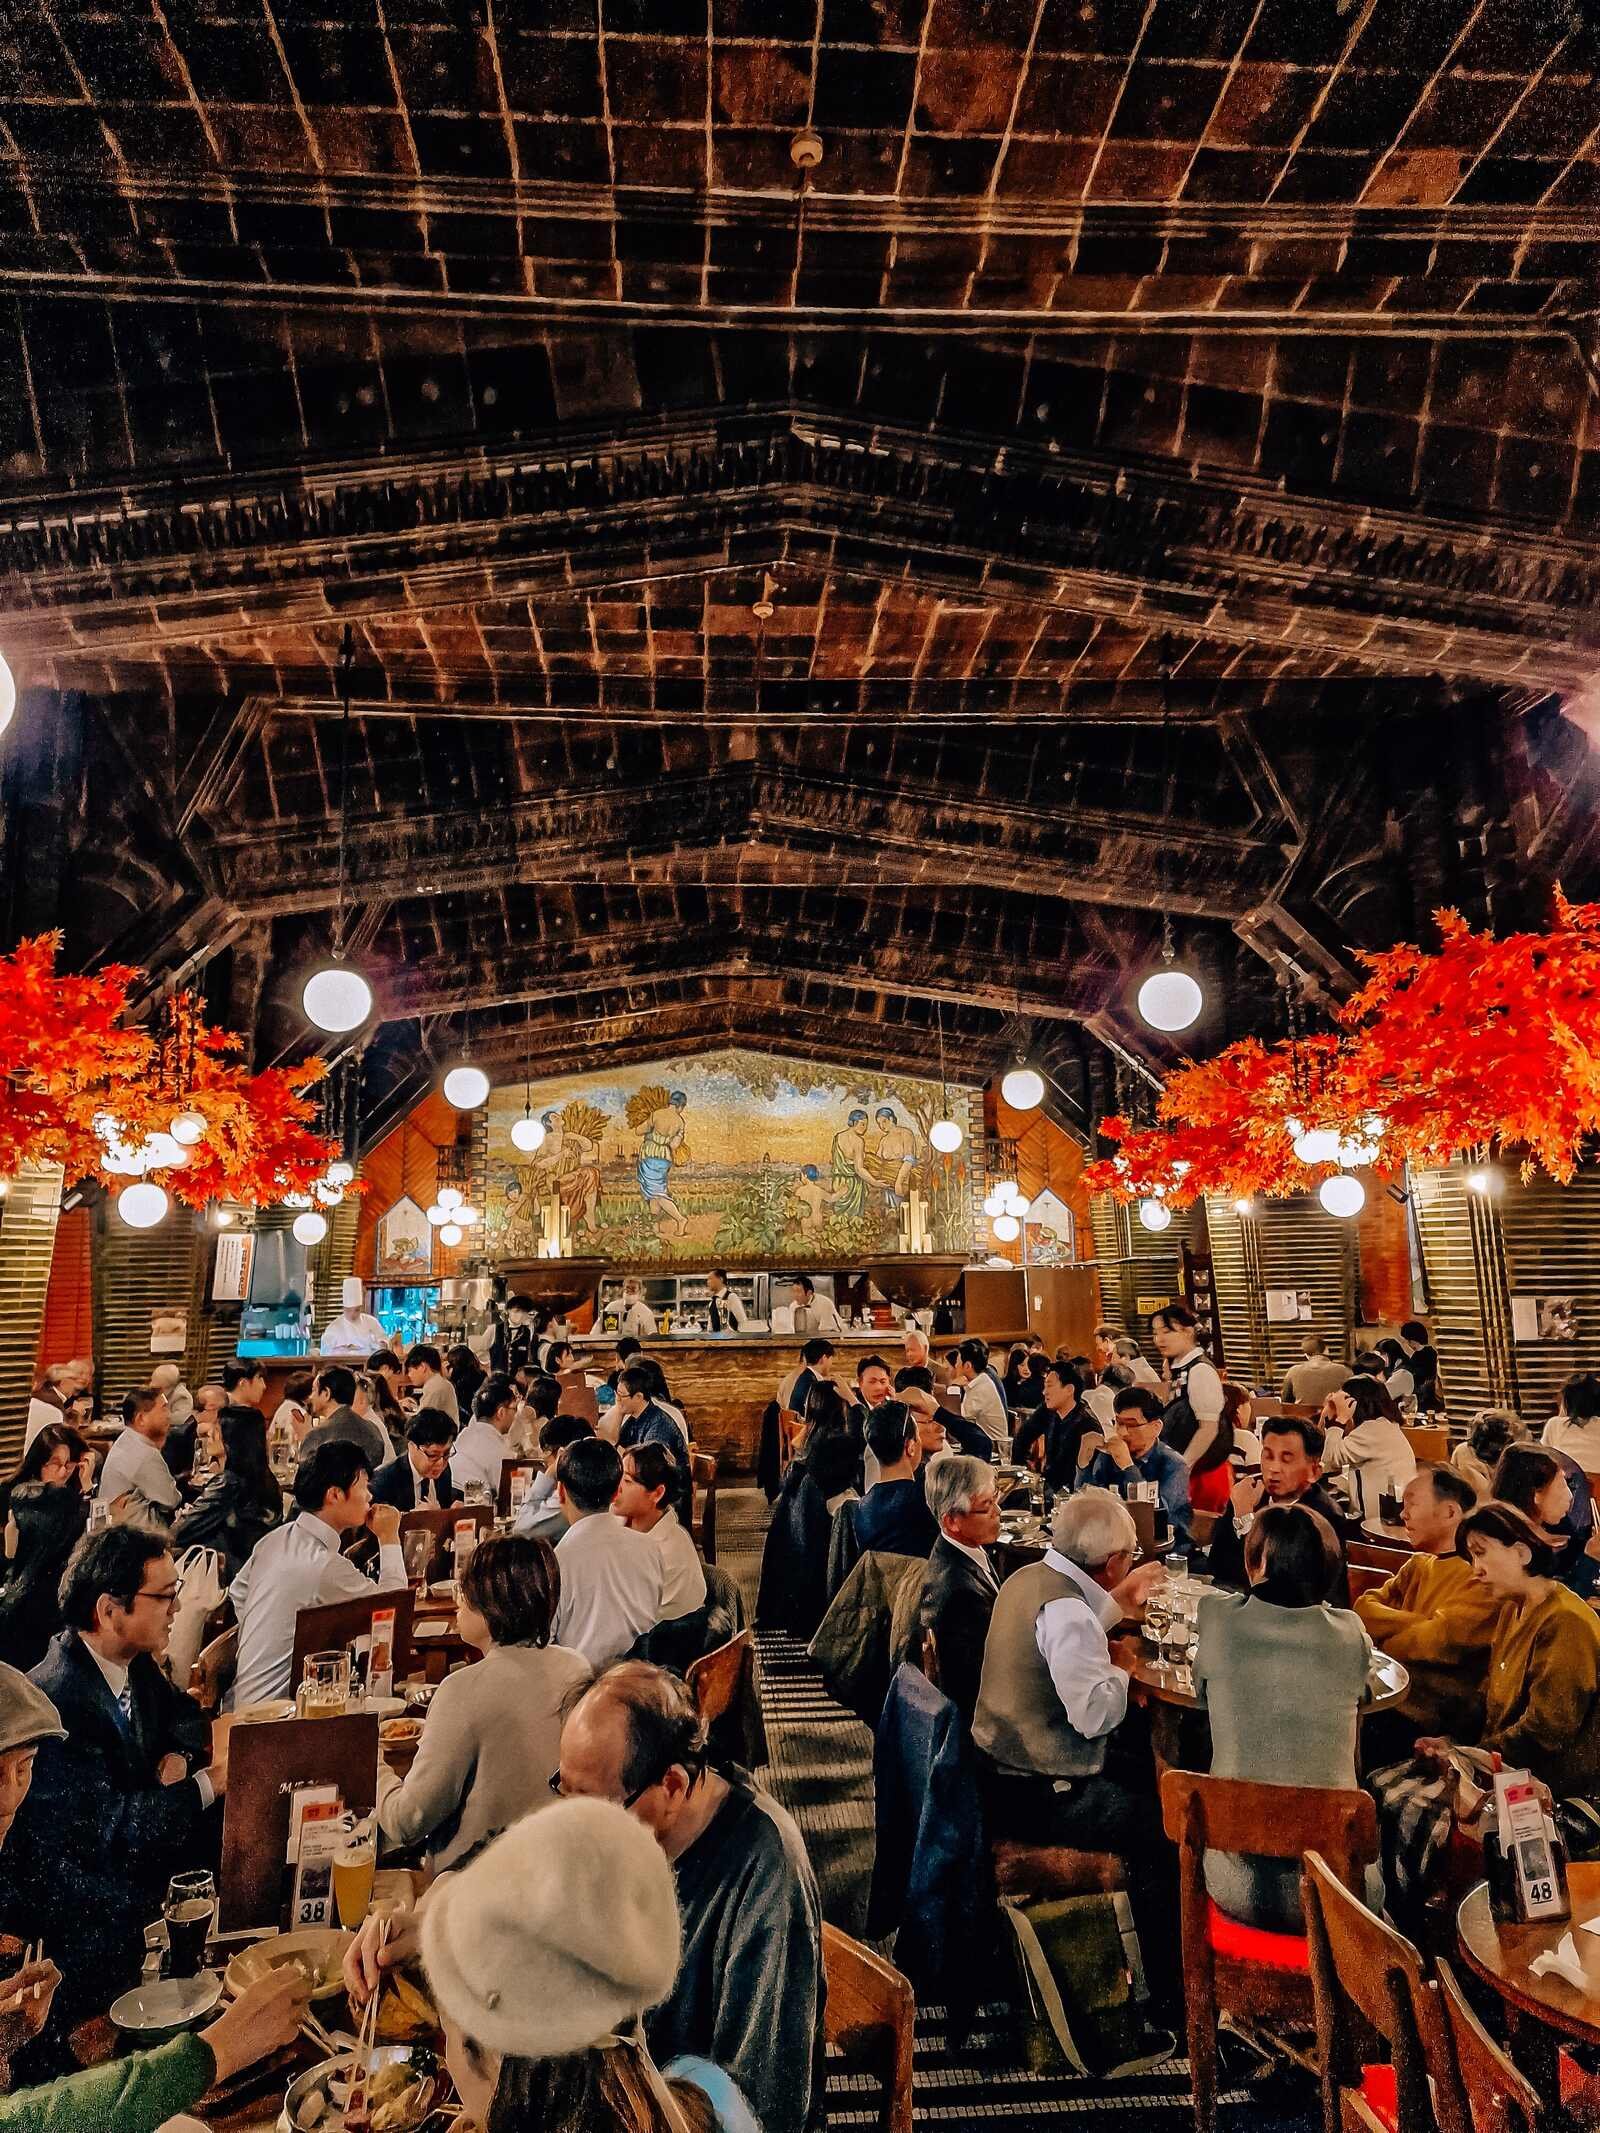 a busy beer hall full of people sitting at tables, the roof is wooden and there's a large mural on the far wall